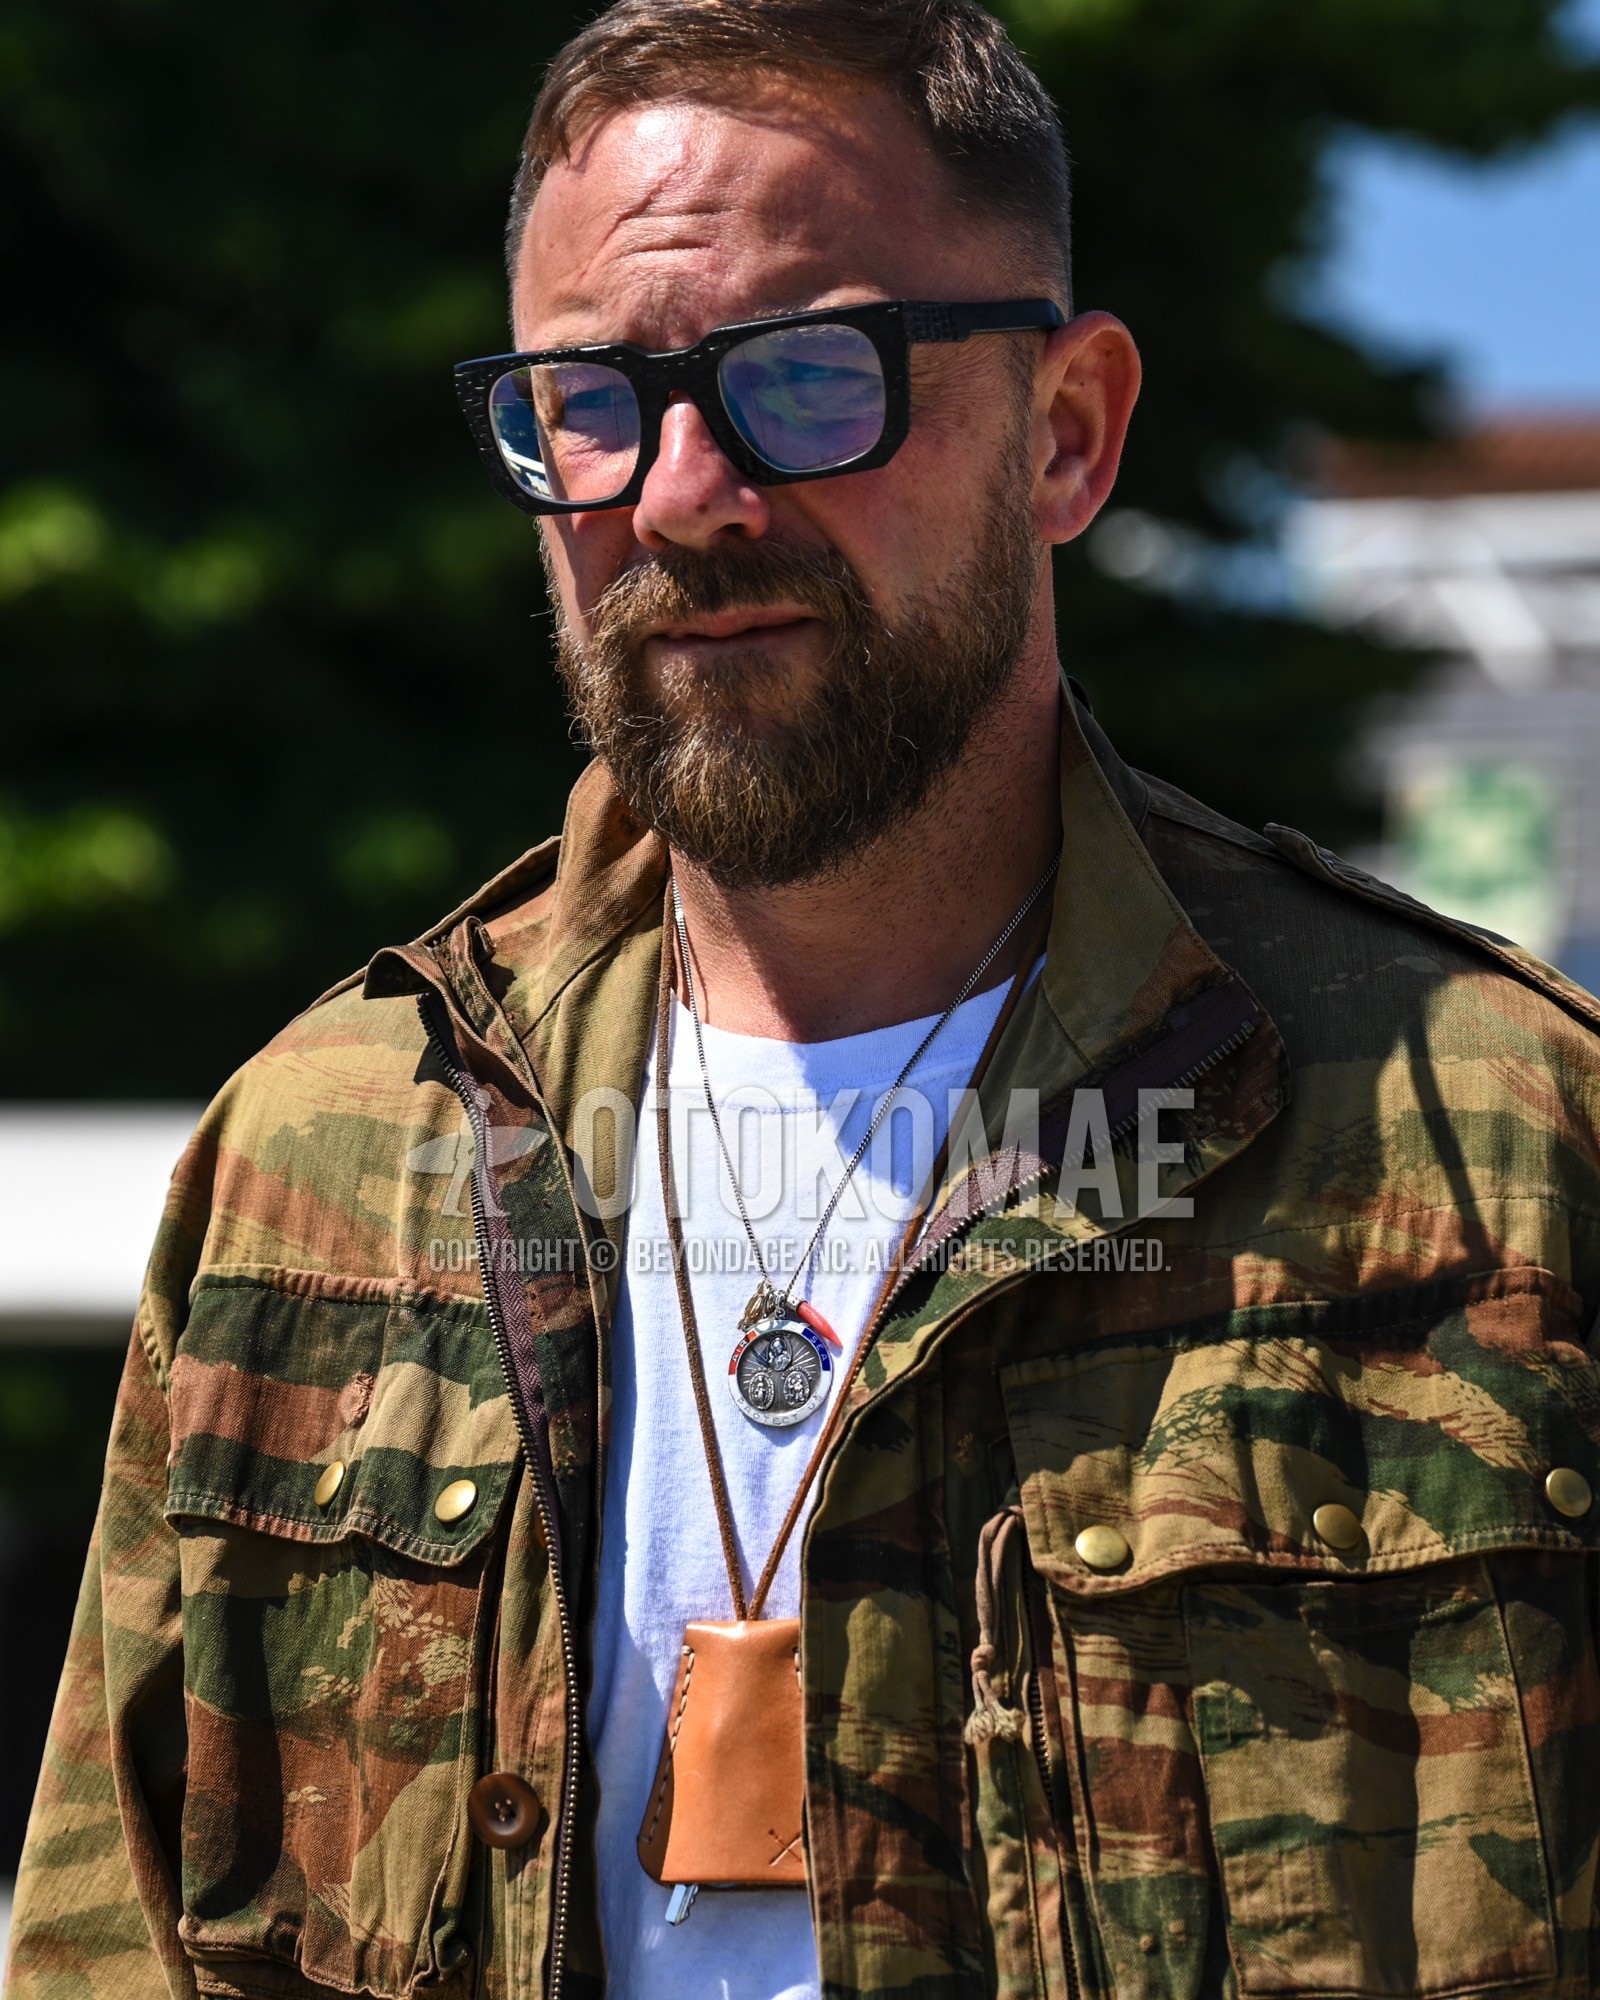 Men's spring summer autumn outfit with clear plain sunglasses, beige camouflage military jacket, white plain t-shirt.